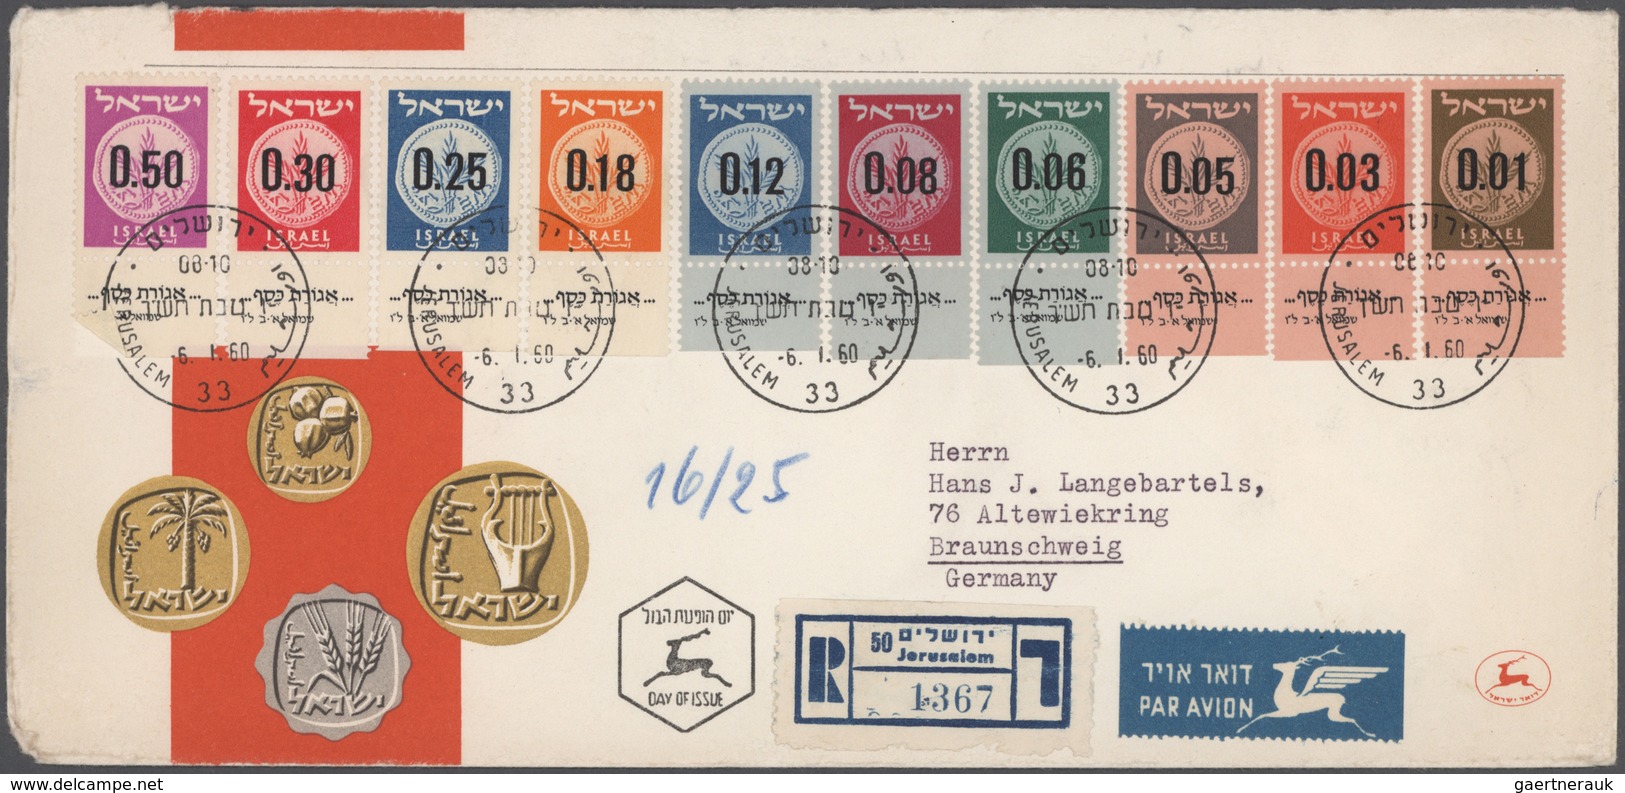 Israel: 1952/2008, mainly from 1970s onwards, impressive accumulation of more than 4.200 covers/card